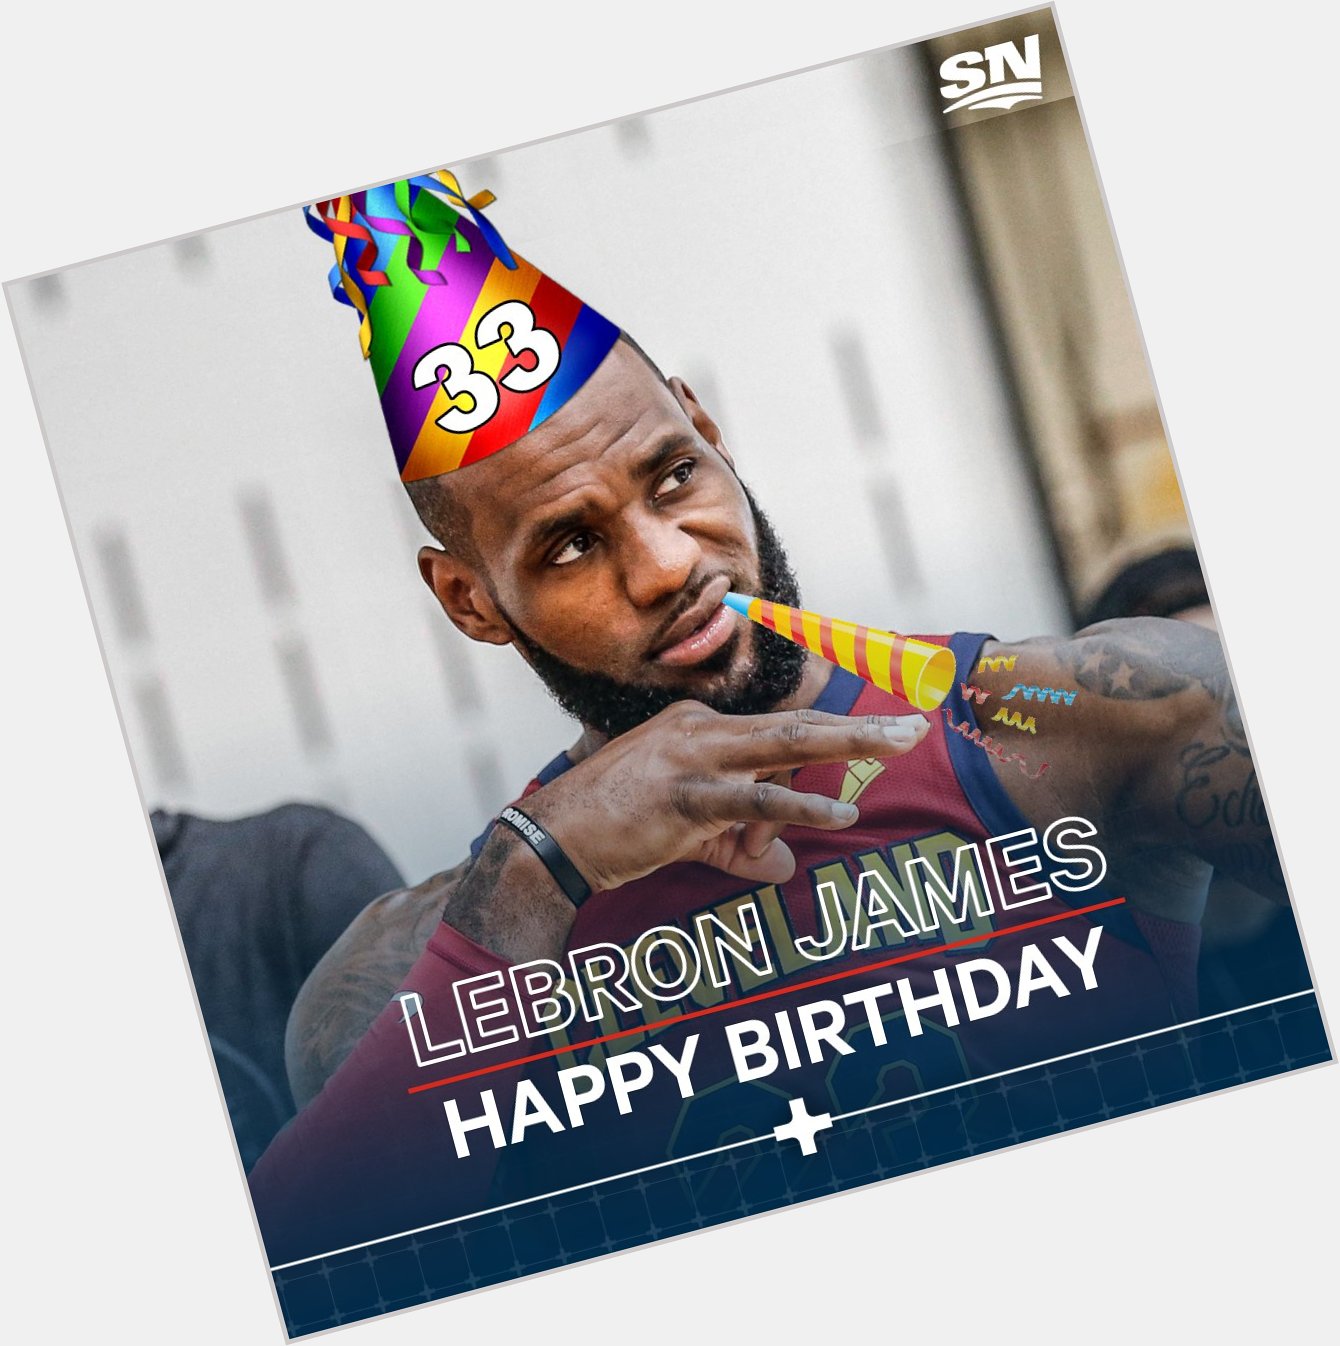 Happy 33rd Birthday LeBron James! How many more titles will the King win before he retires? 